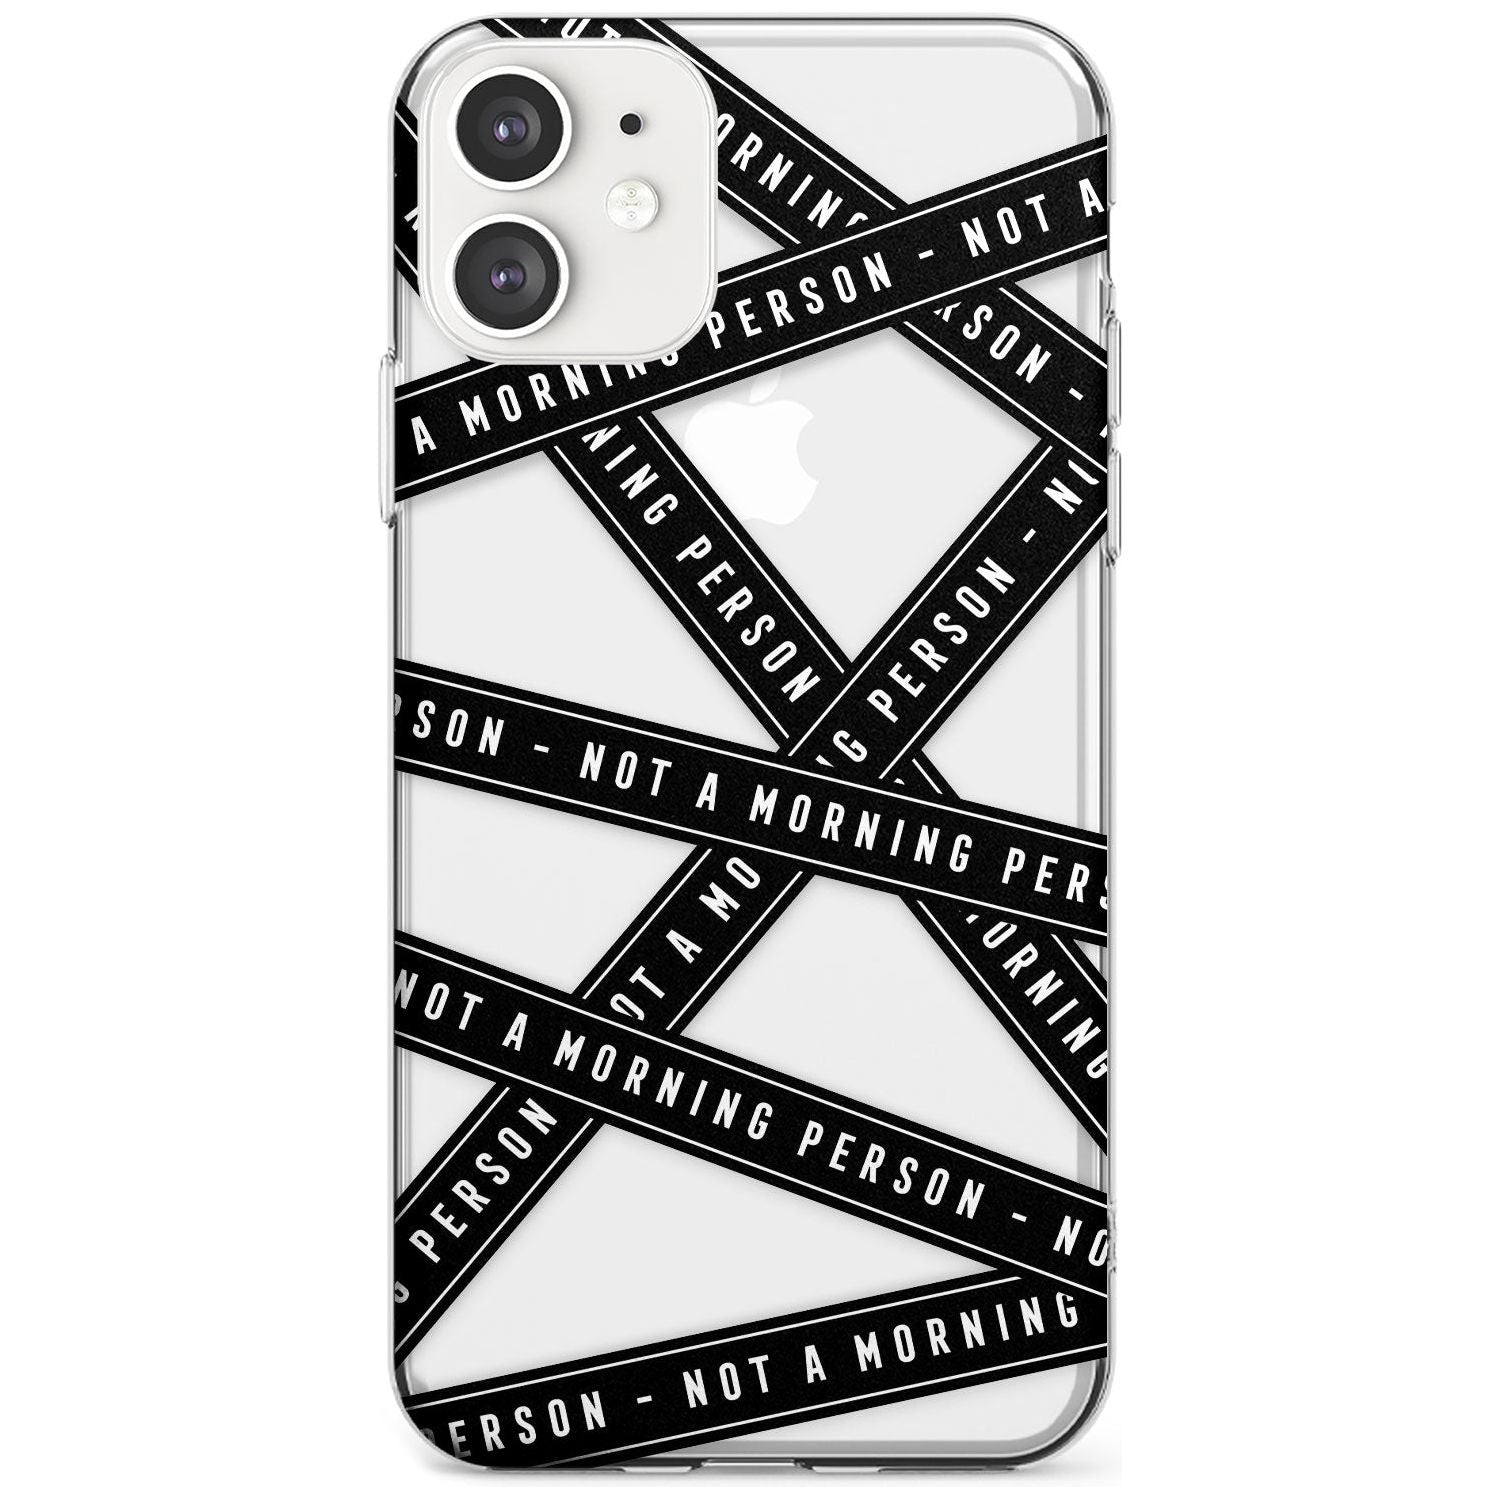 Caution Tape (Clear) Not a Morning Person Slim TPU Phone Case for iPhone 11